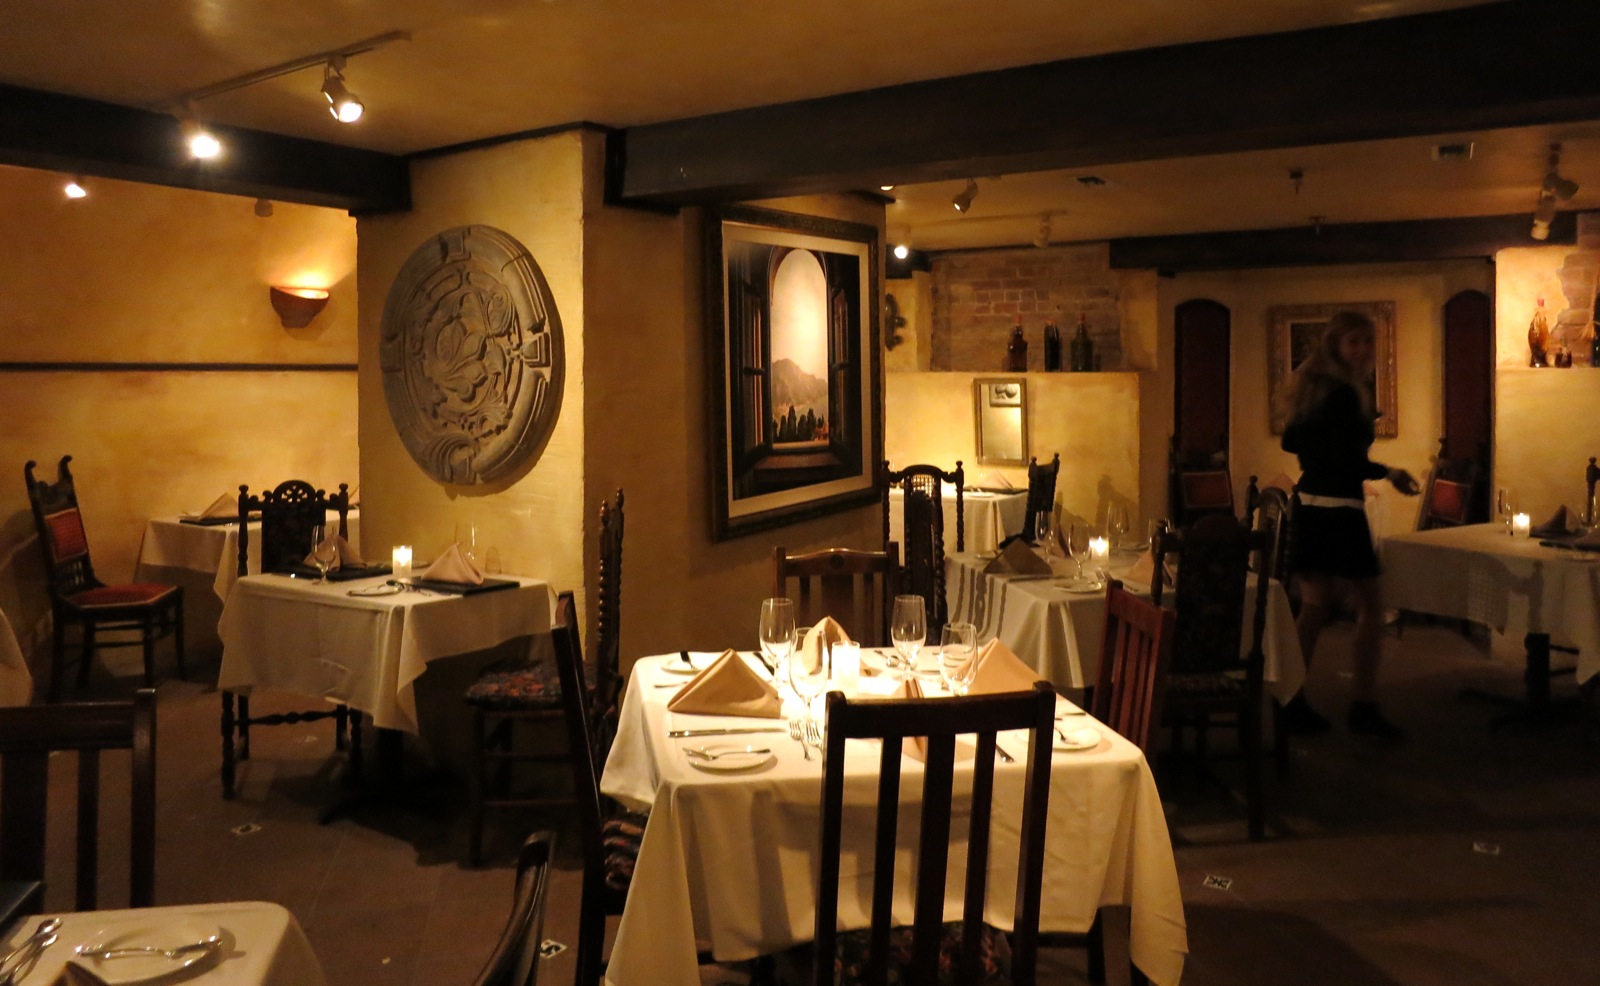 The Crazy Reason Behind the 2016 Closing of a Historic Restaurant in